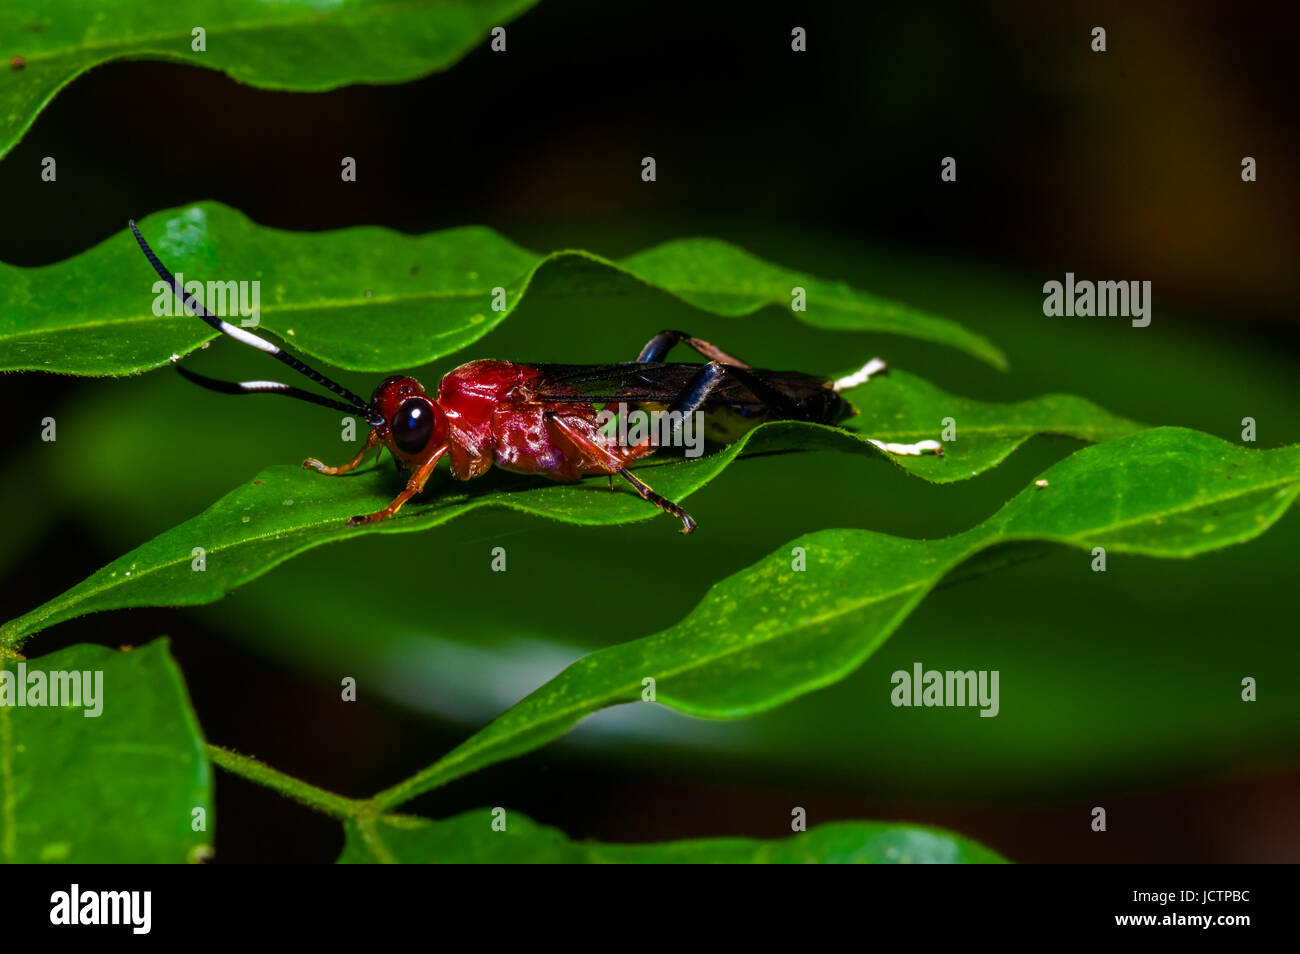 Small red insect sitting on a green leaf in the amazon rainforest in Cuyabeno National Park, in Ecuador. Stock Photo